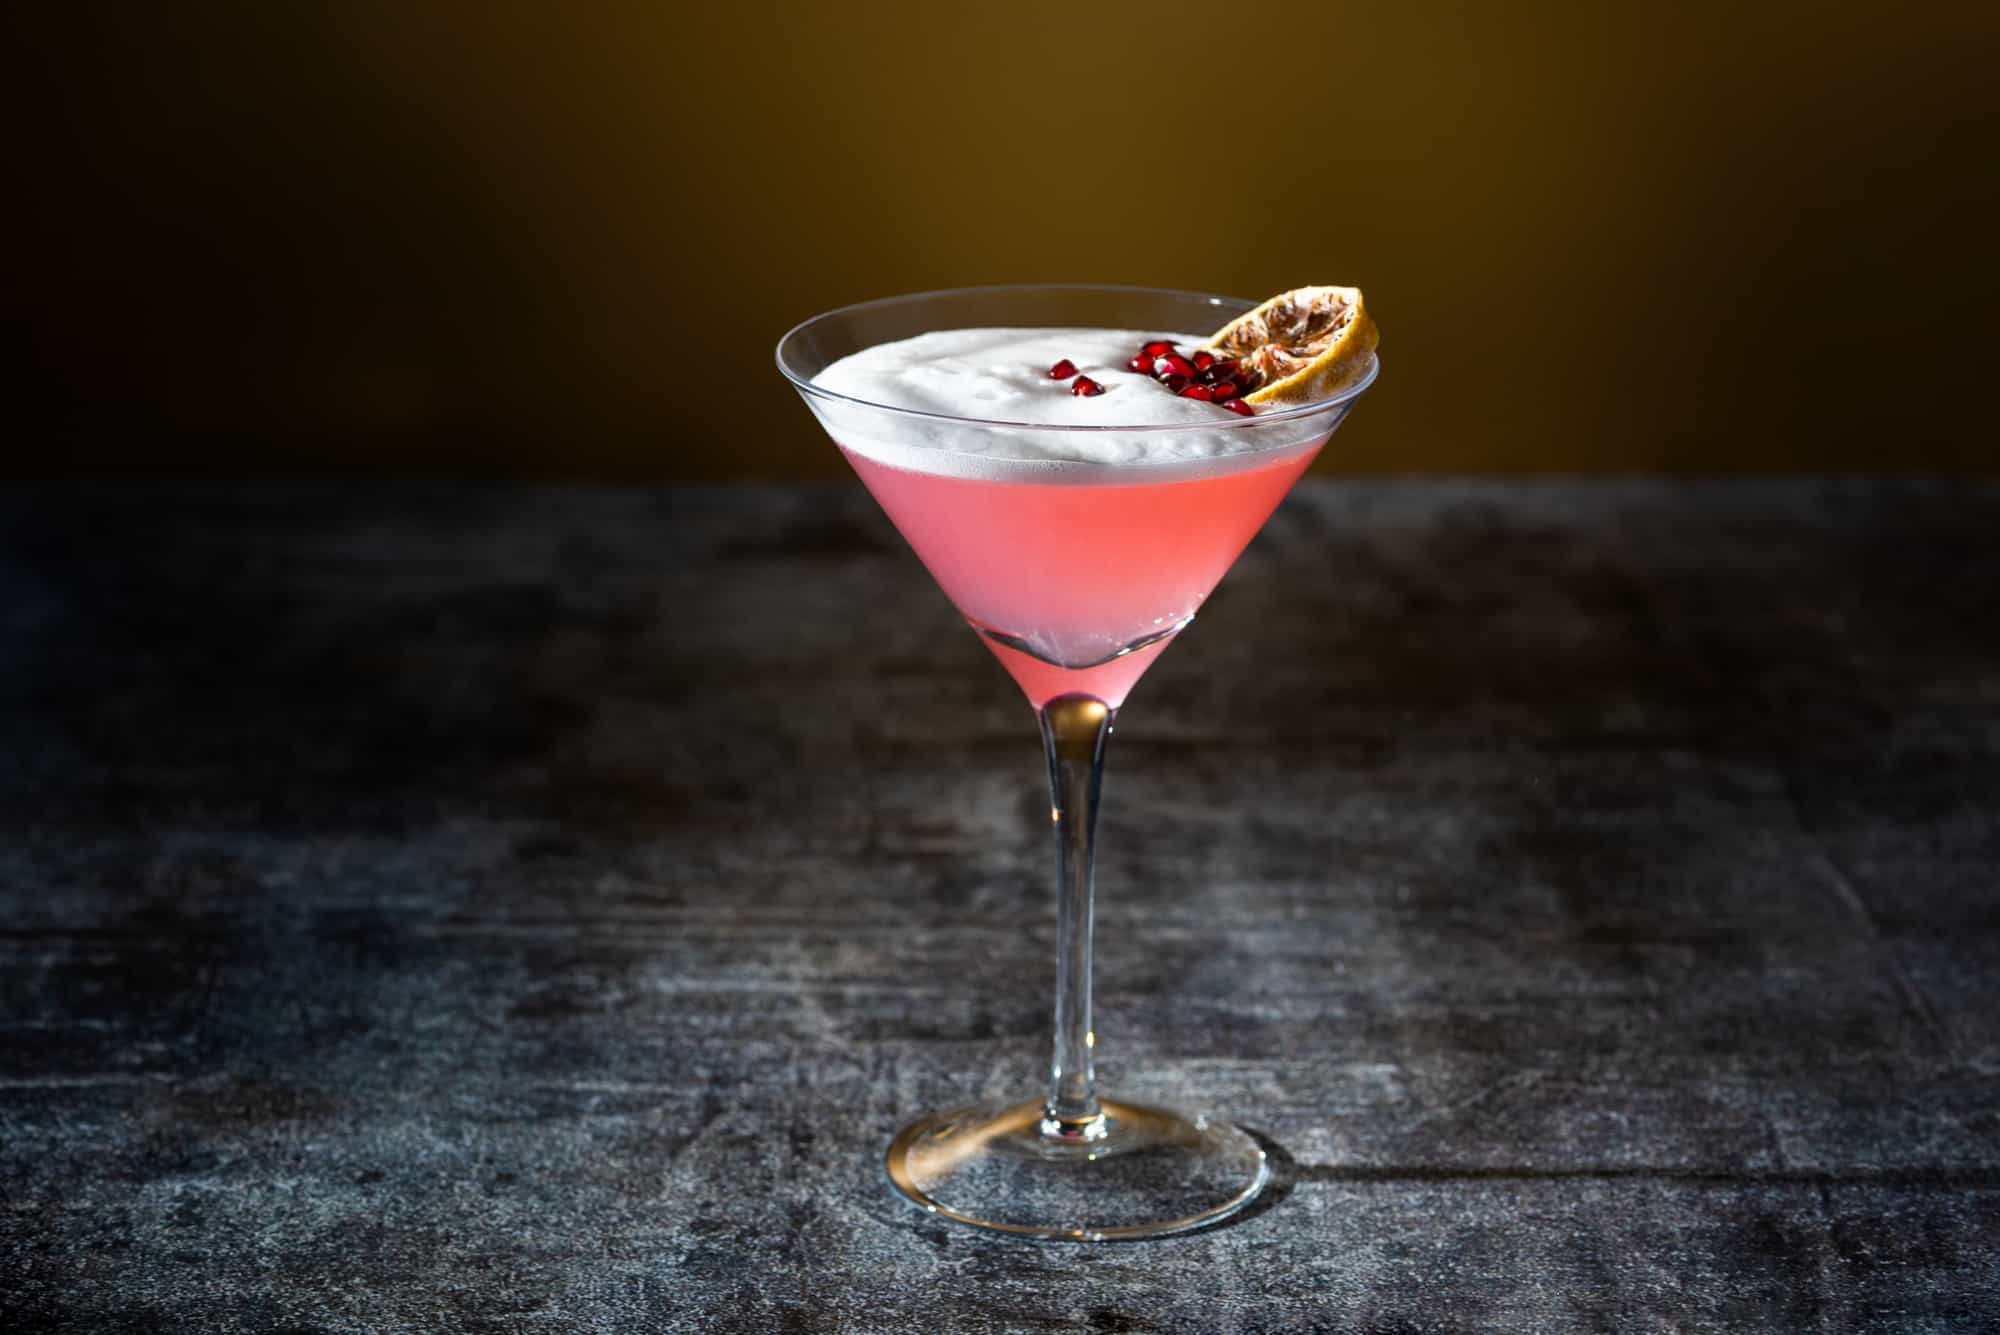 A martini with pomegranate garnish and whipped cream.